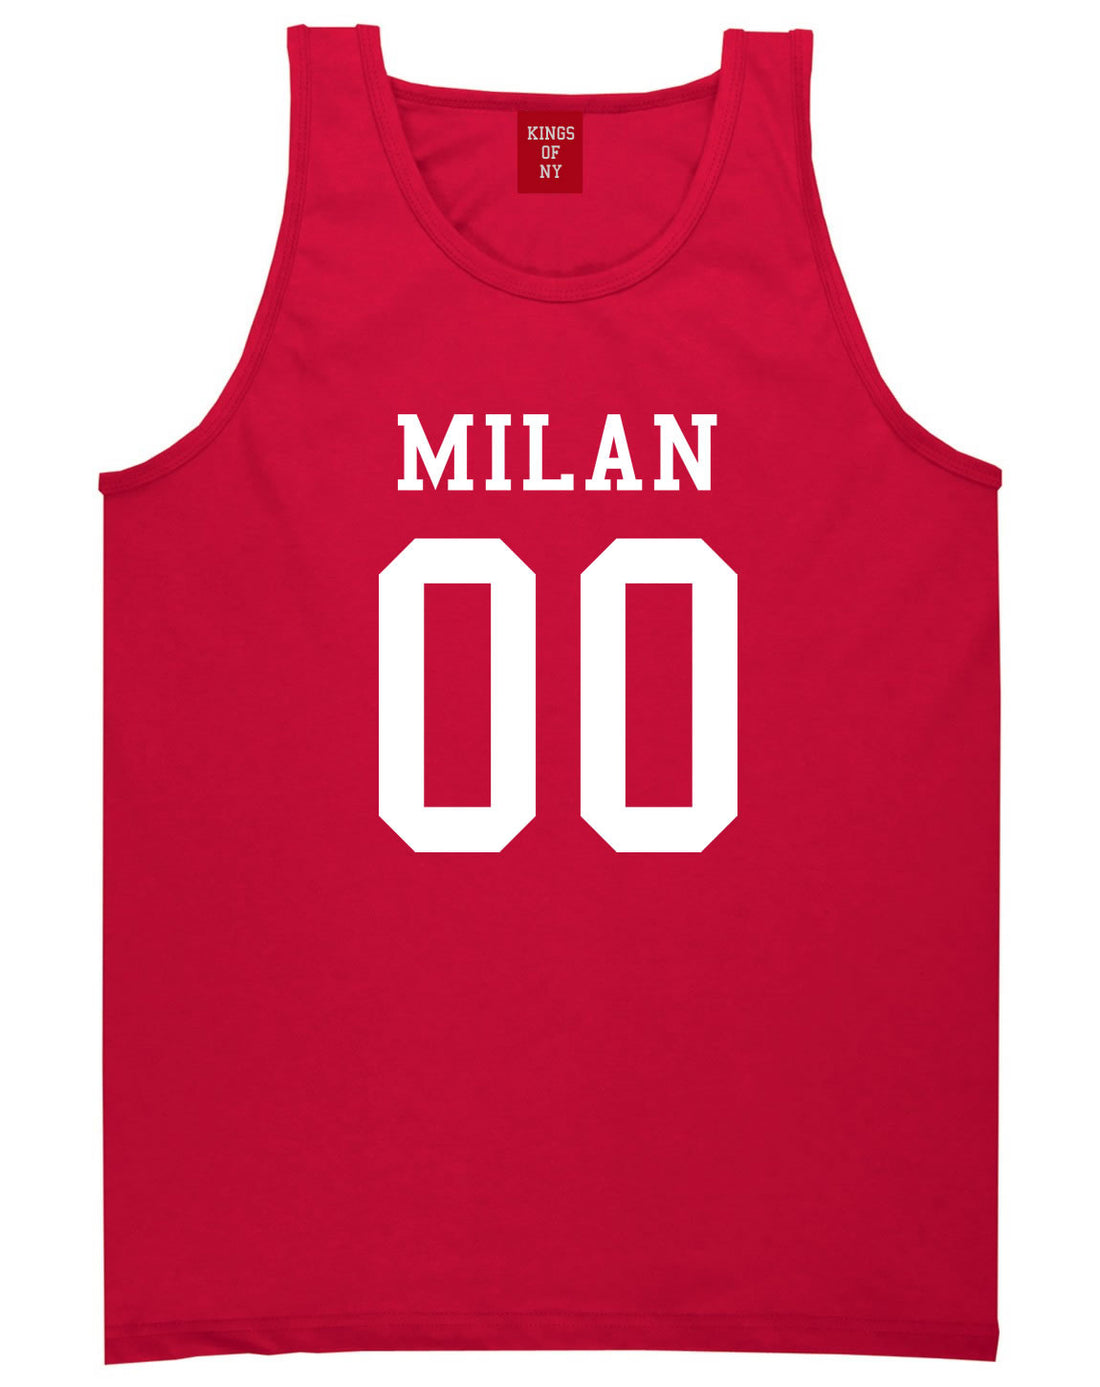 Milan Team 00 Jersey Tank Top in Red By Kings Of NY